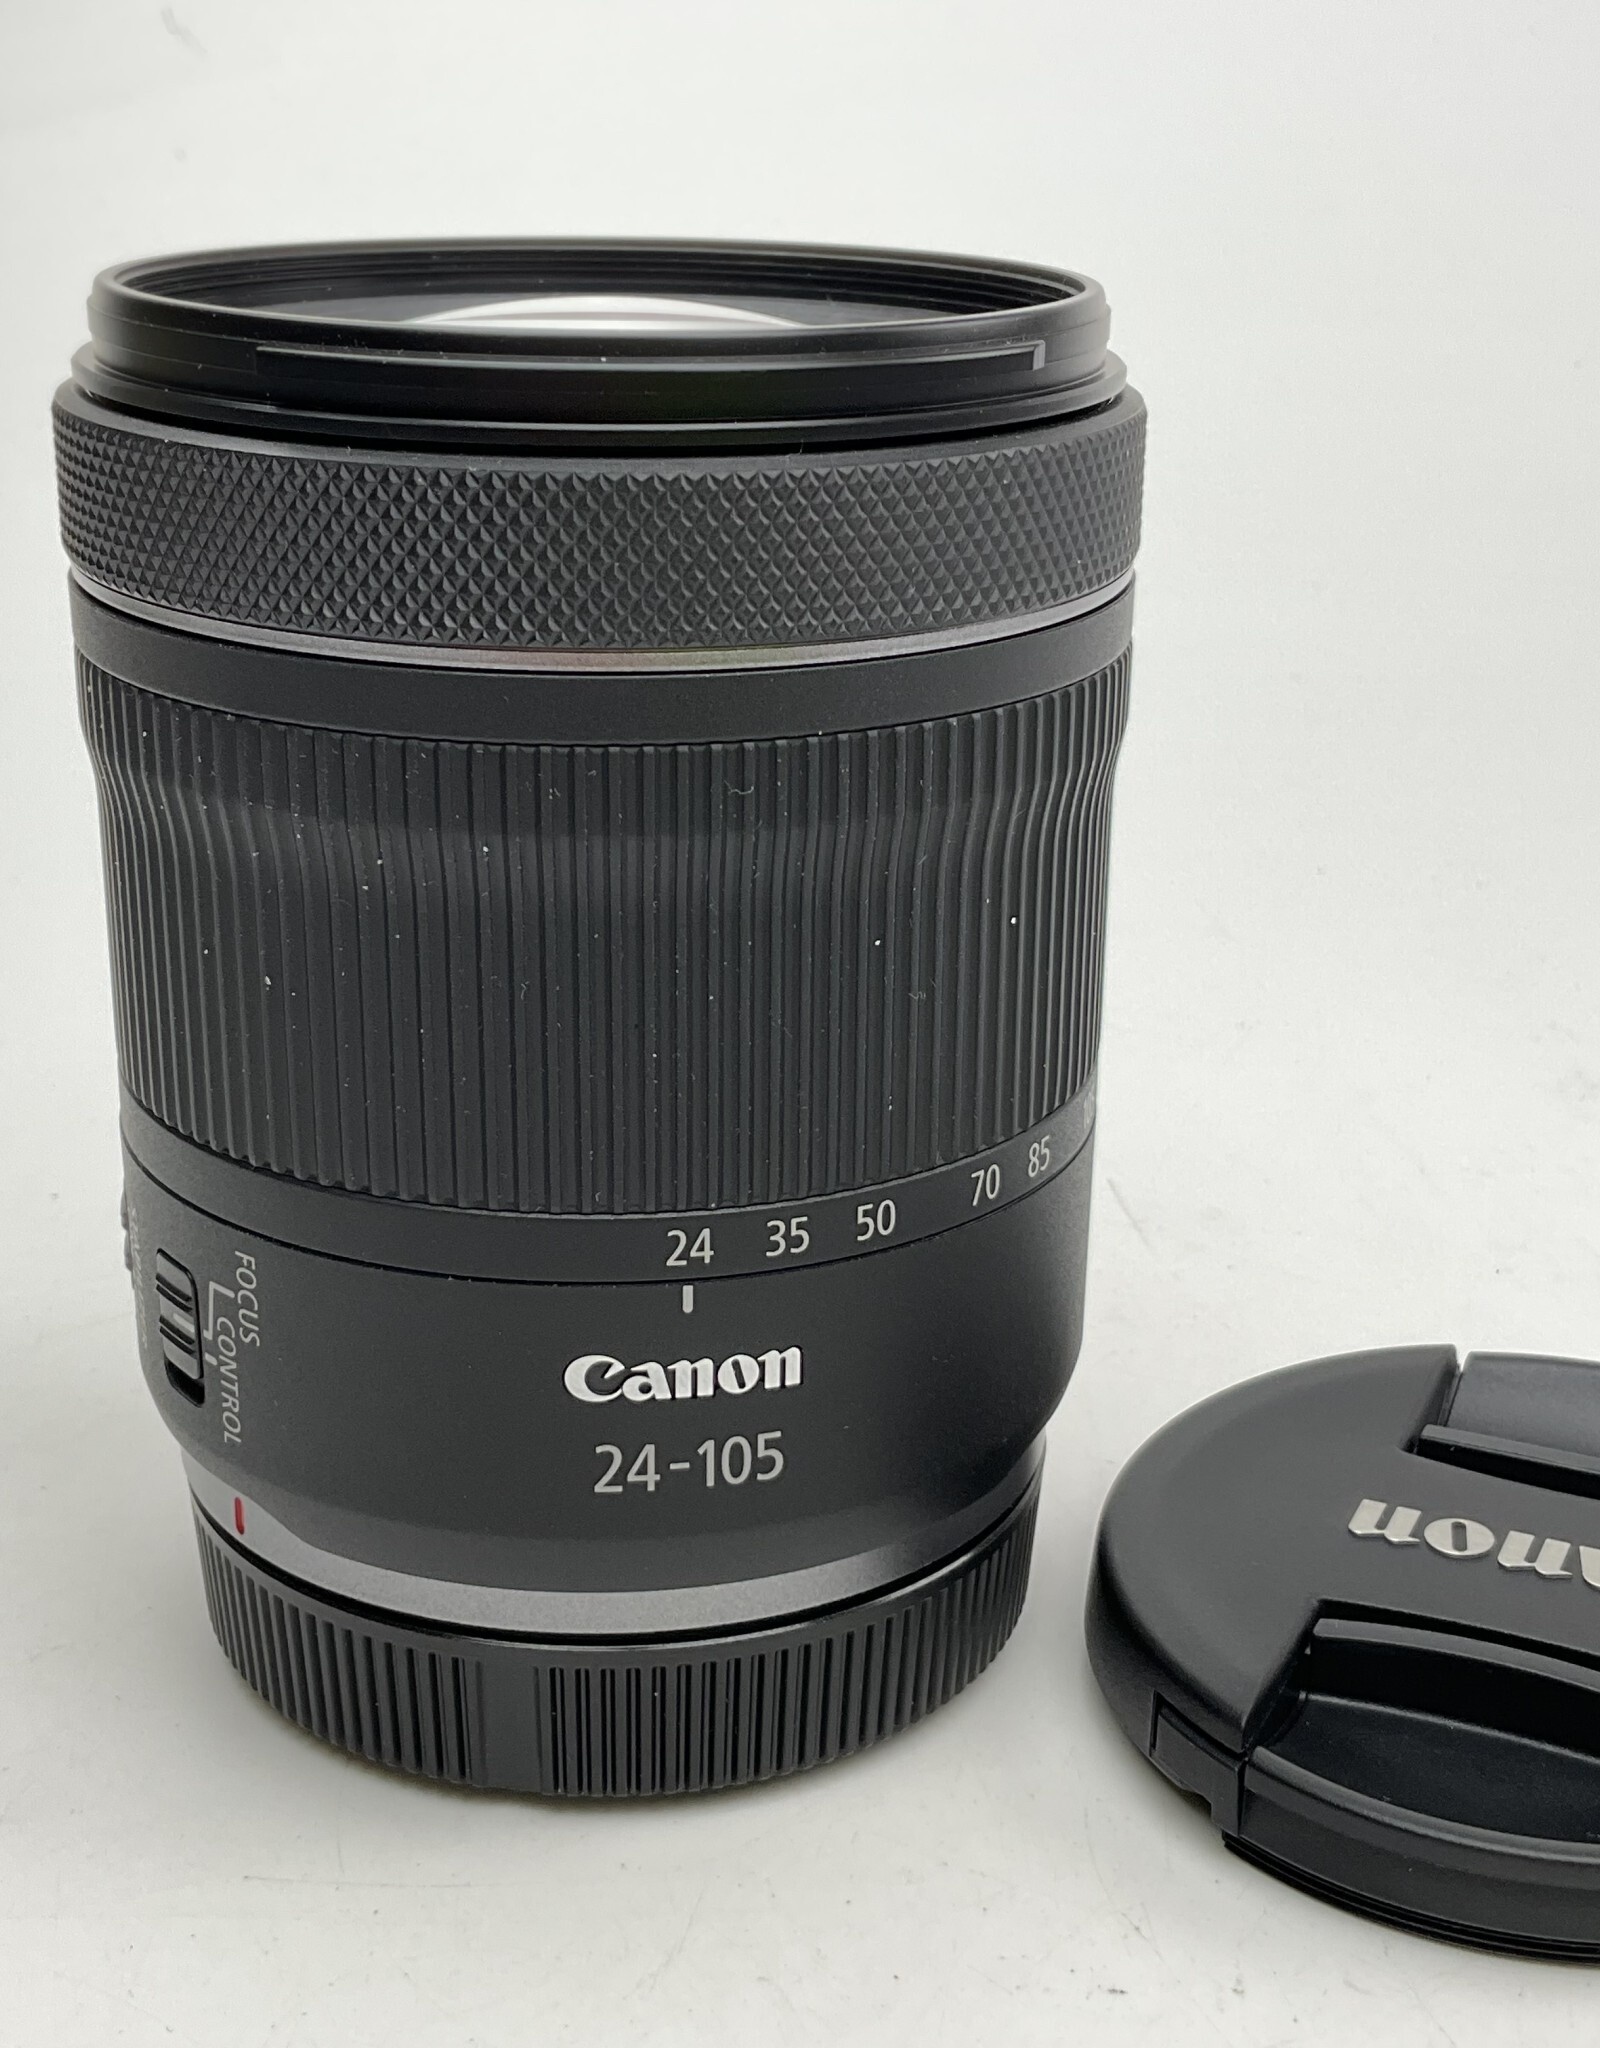 CANON Canon RF 24-105mm f4-7.1 IS STM Lens Used EX